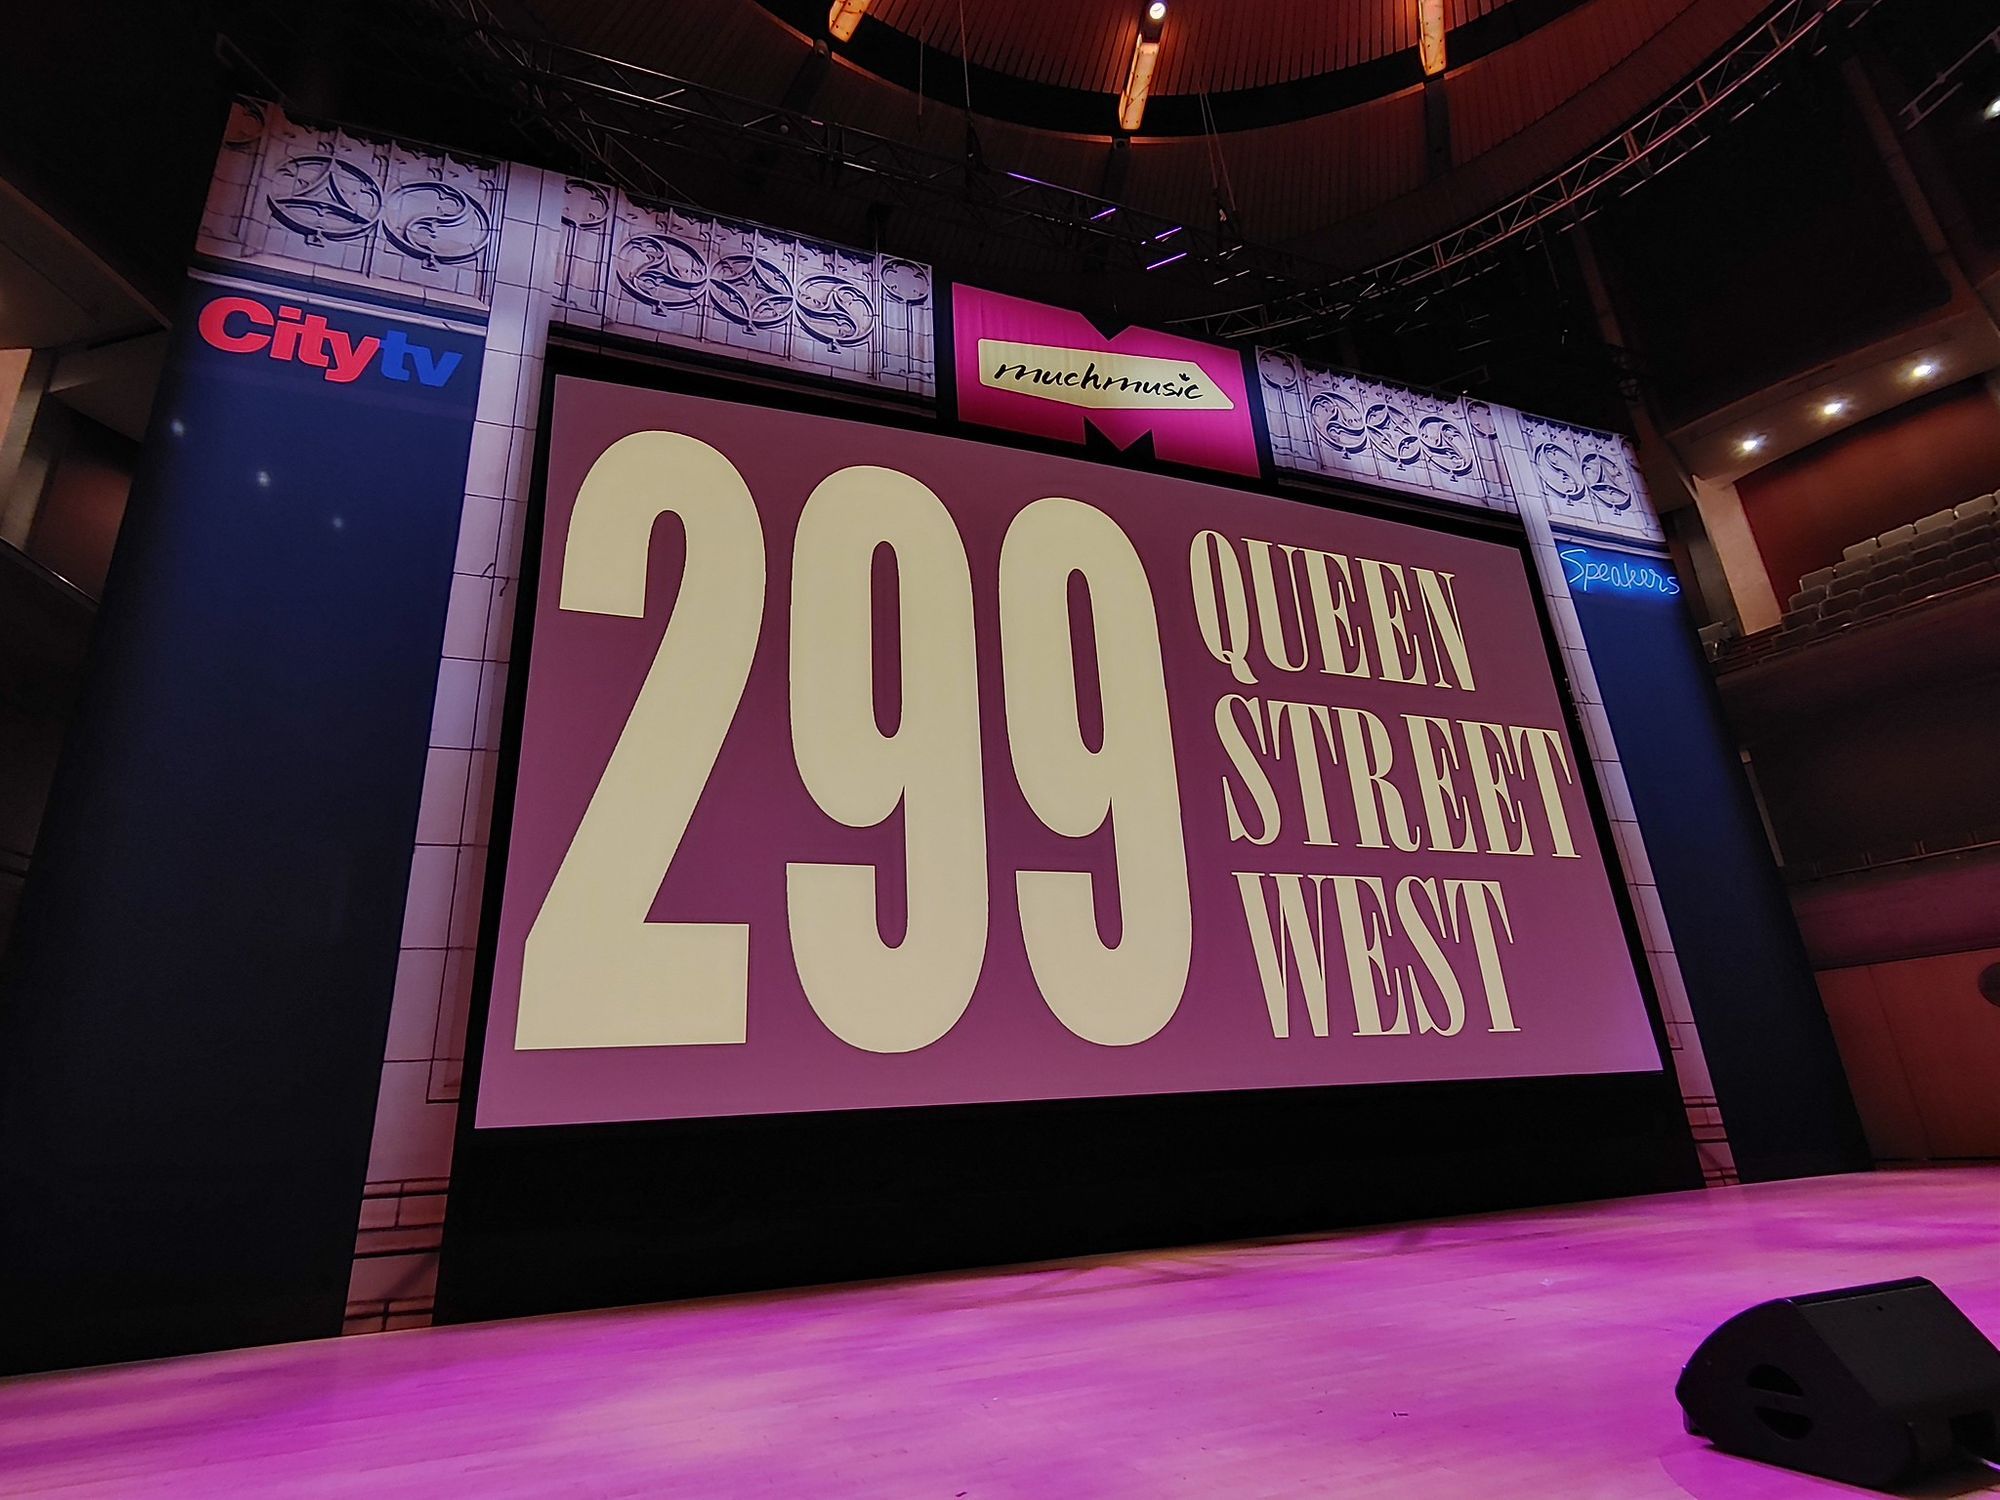 299 Queen Street West MuchMusic Documentary Goes MIA on Crave